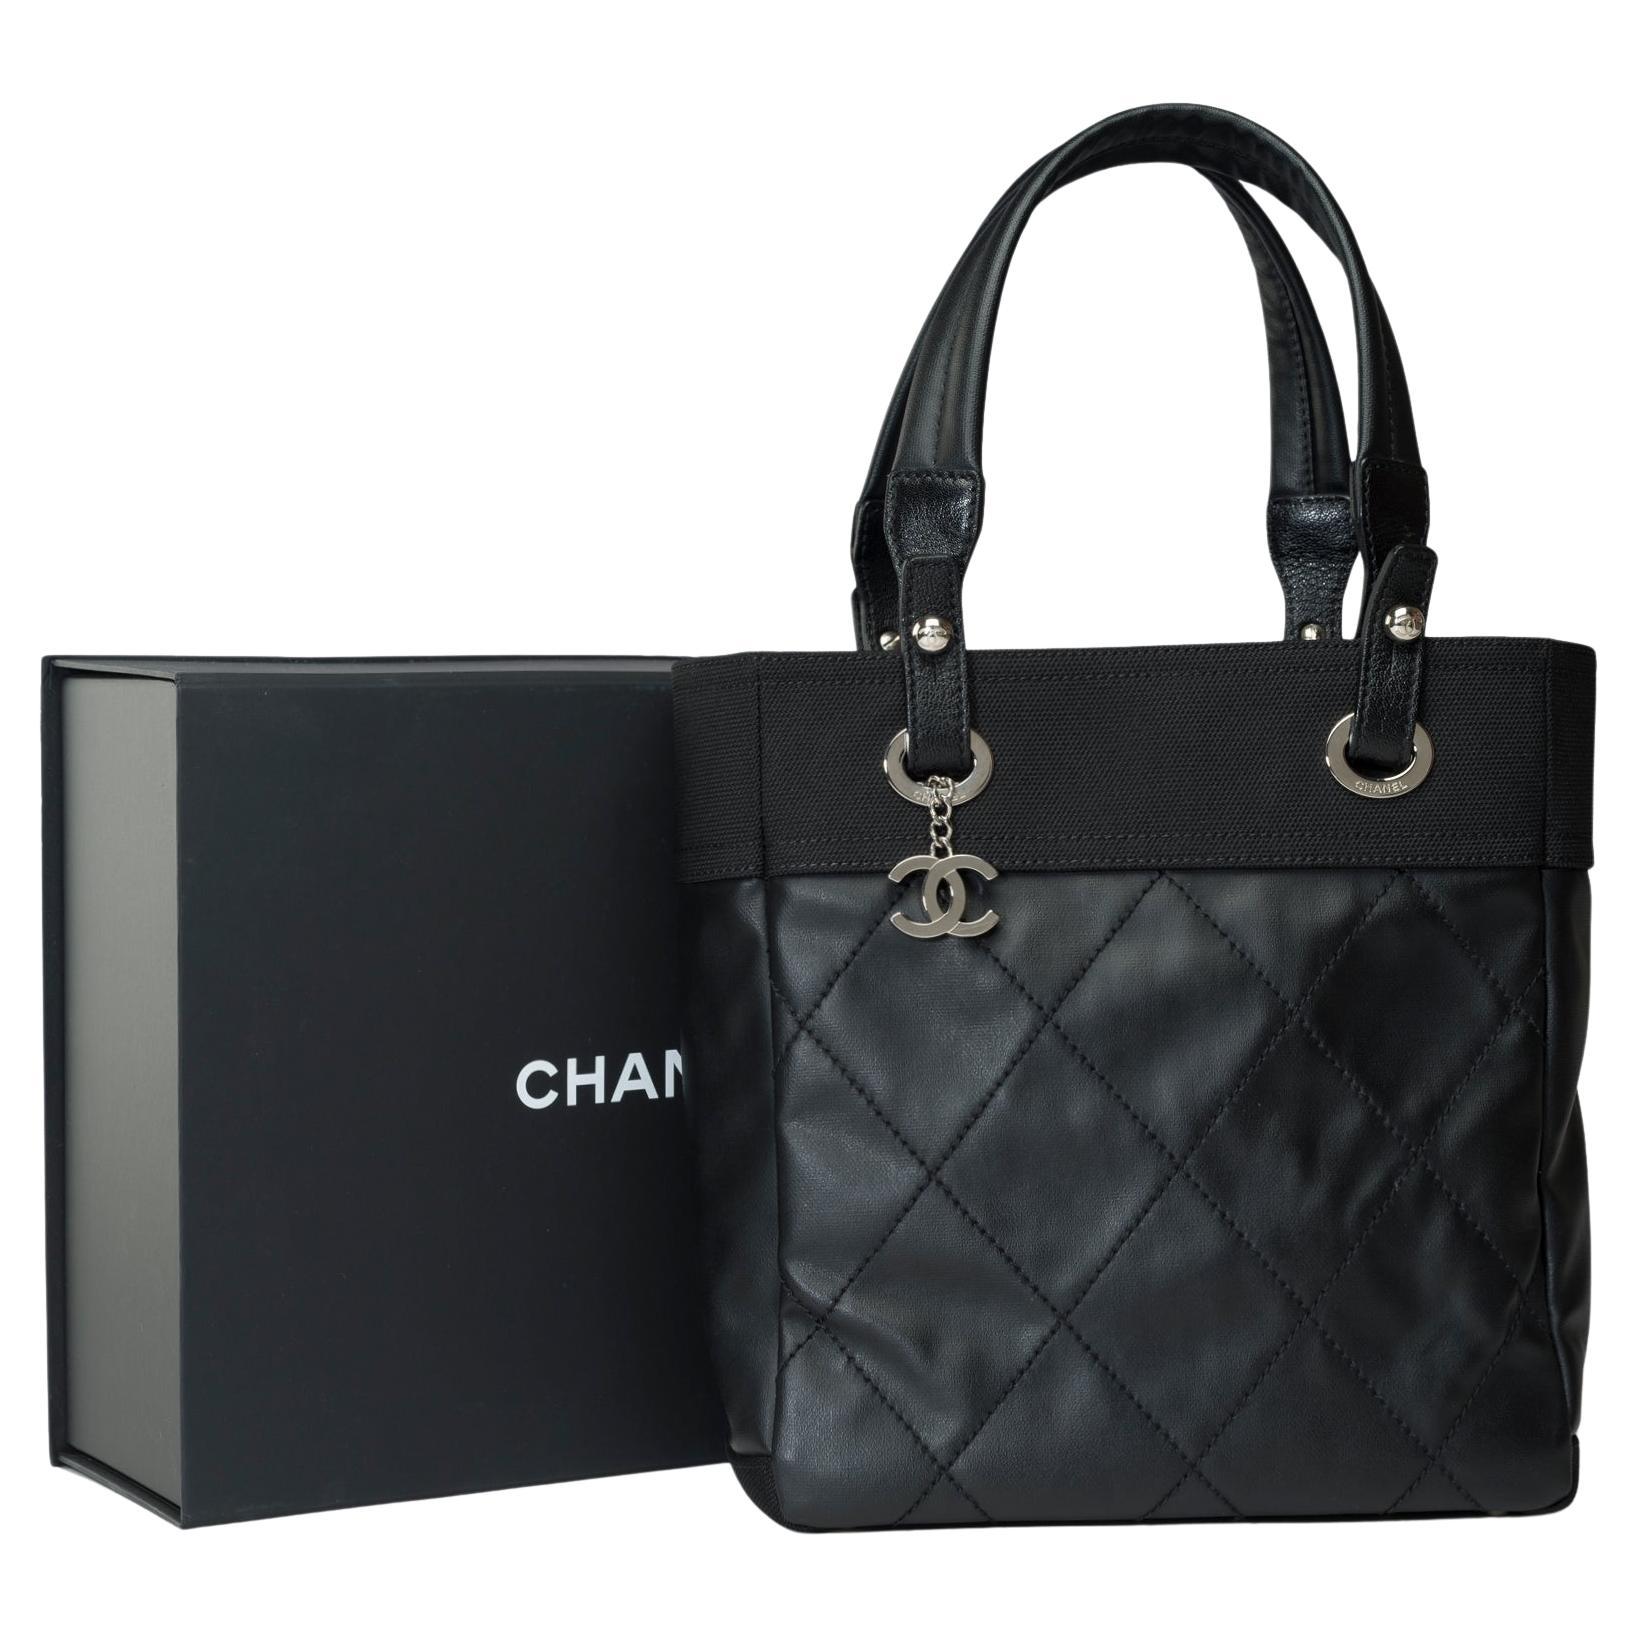  Chanel Paris-Biarritz Tote bag in black coated canvas , SHW For Sale